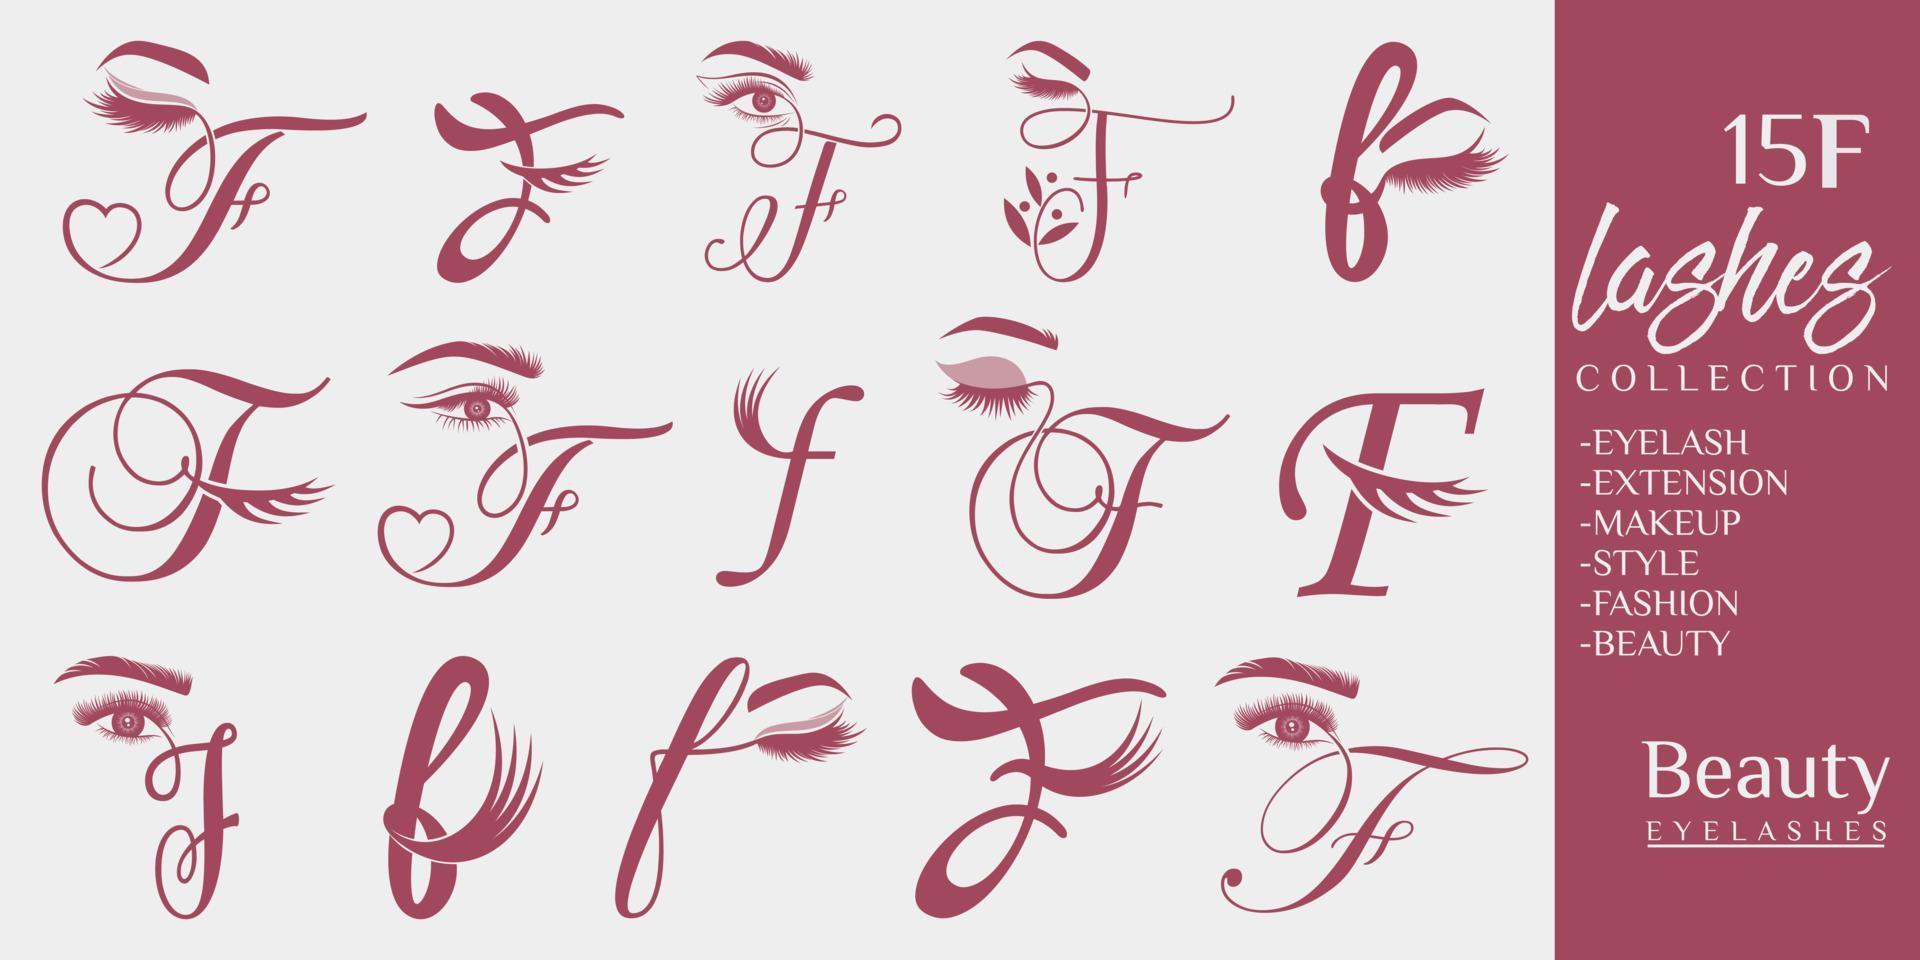 Eyelashes logo with letter F concept vector